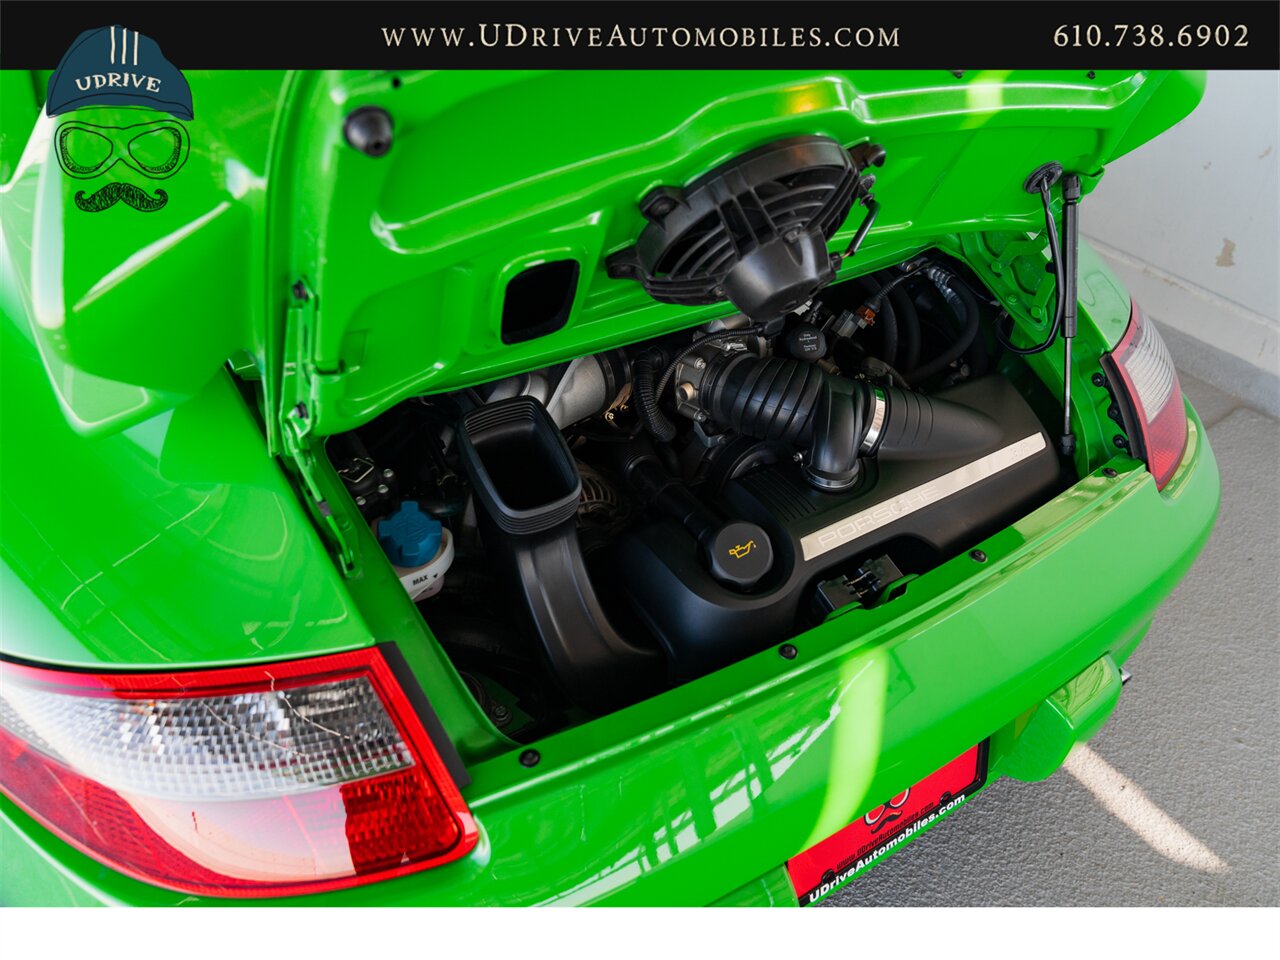 2006 Porsche 911 Carrera 4S  997 PTS Signal Green 6Sp Sport Sts Spt Chrono Spt Exhst - Photo 52 - West Chester, PA 19382